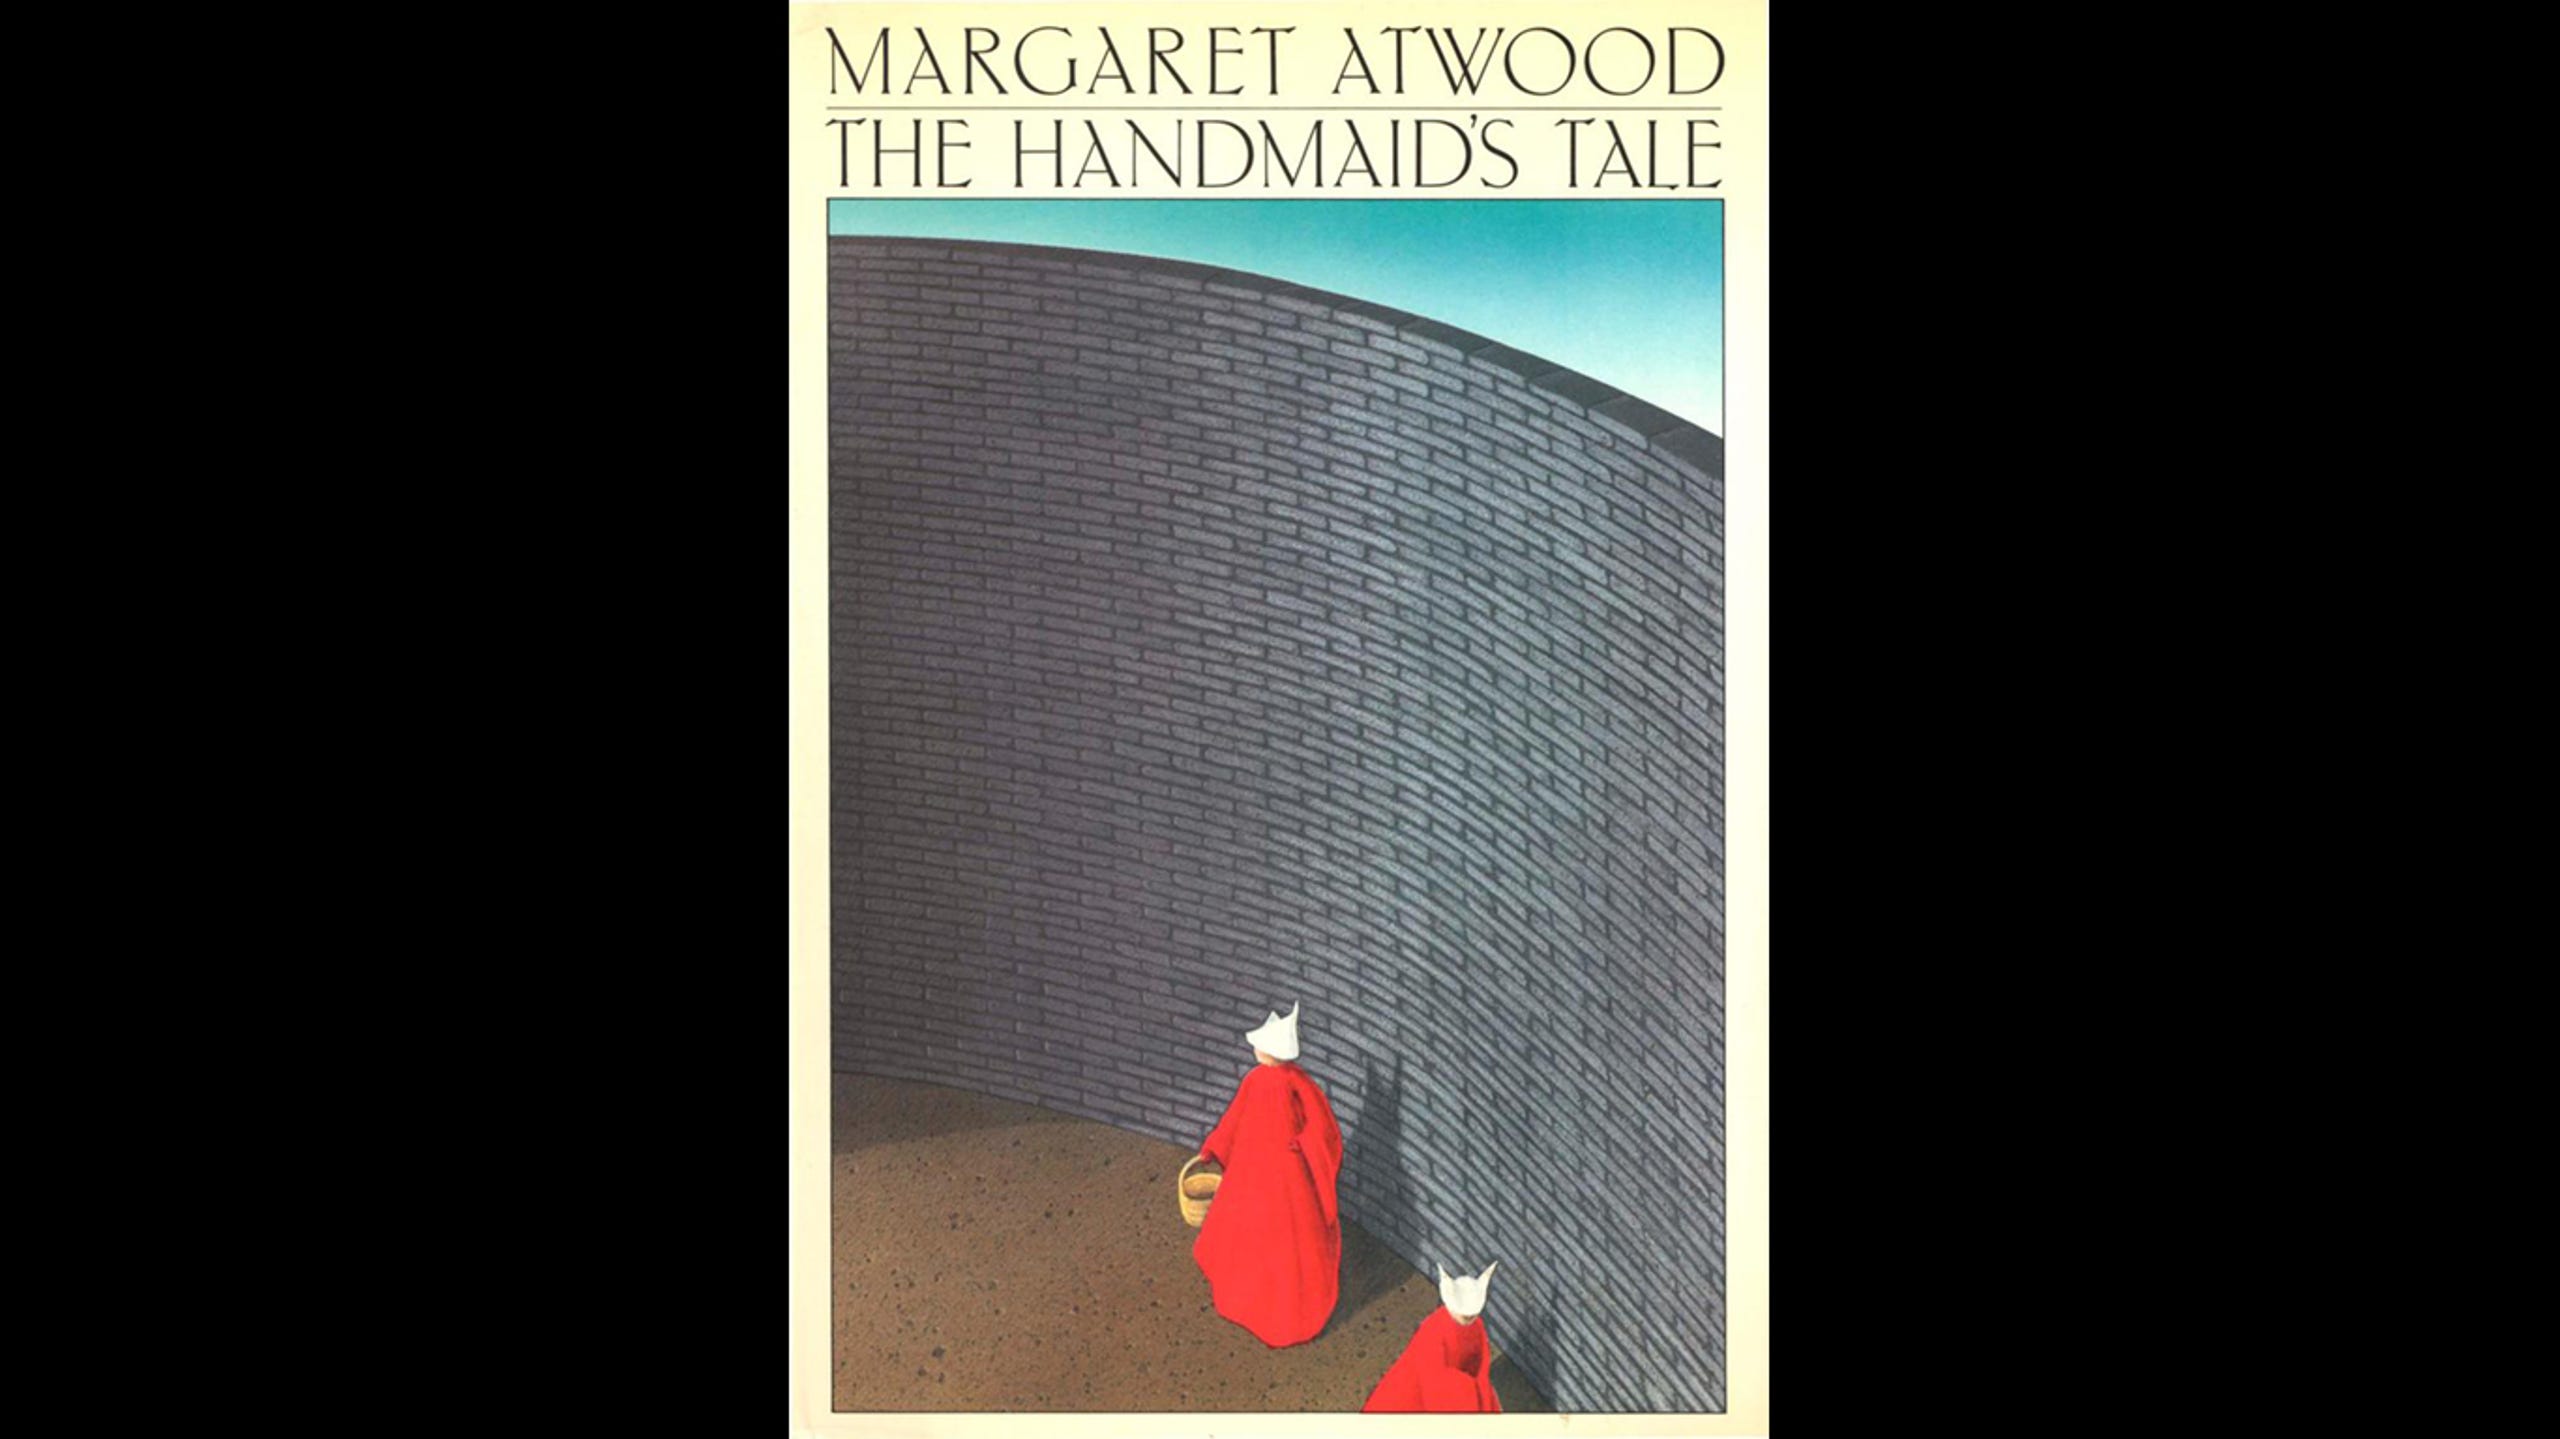 <strong>19. The Handmaid's Tale </strong><strong>• Author:</strong> Margaret Atwood <strong>• Originally published in:</strong> 1985 <strong>• </strong>This is a classic that should be on the list for the same reasons as "1984" and "Fahrenheit 451," according to Uruburu. Moreover, the control over women's bodies and their subjugation as an issue is alarmingly relevant today, she added. "These were all thought to be science fiction when they first came out or cautionary tales and now they are the reality of the current political state of affairs in this country."